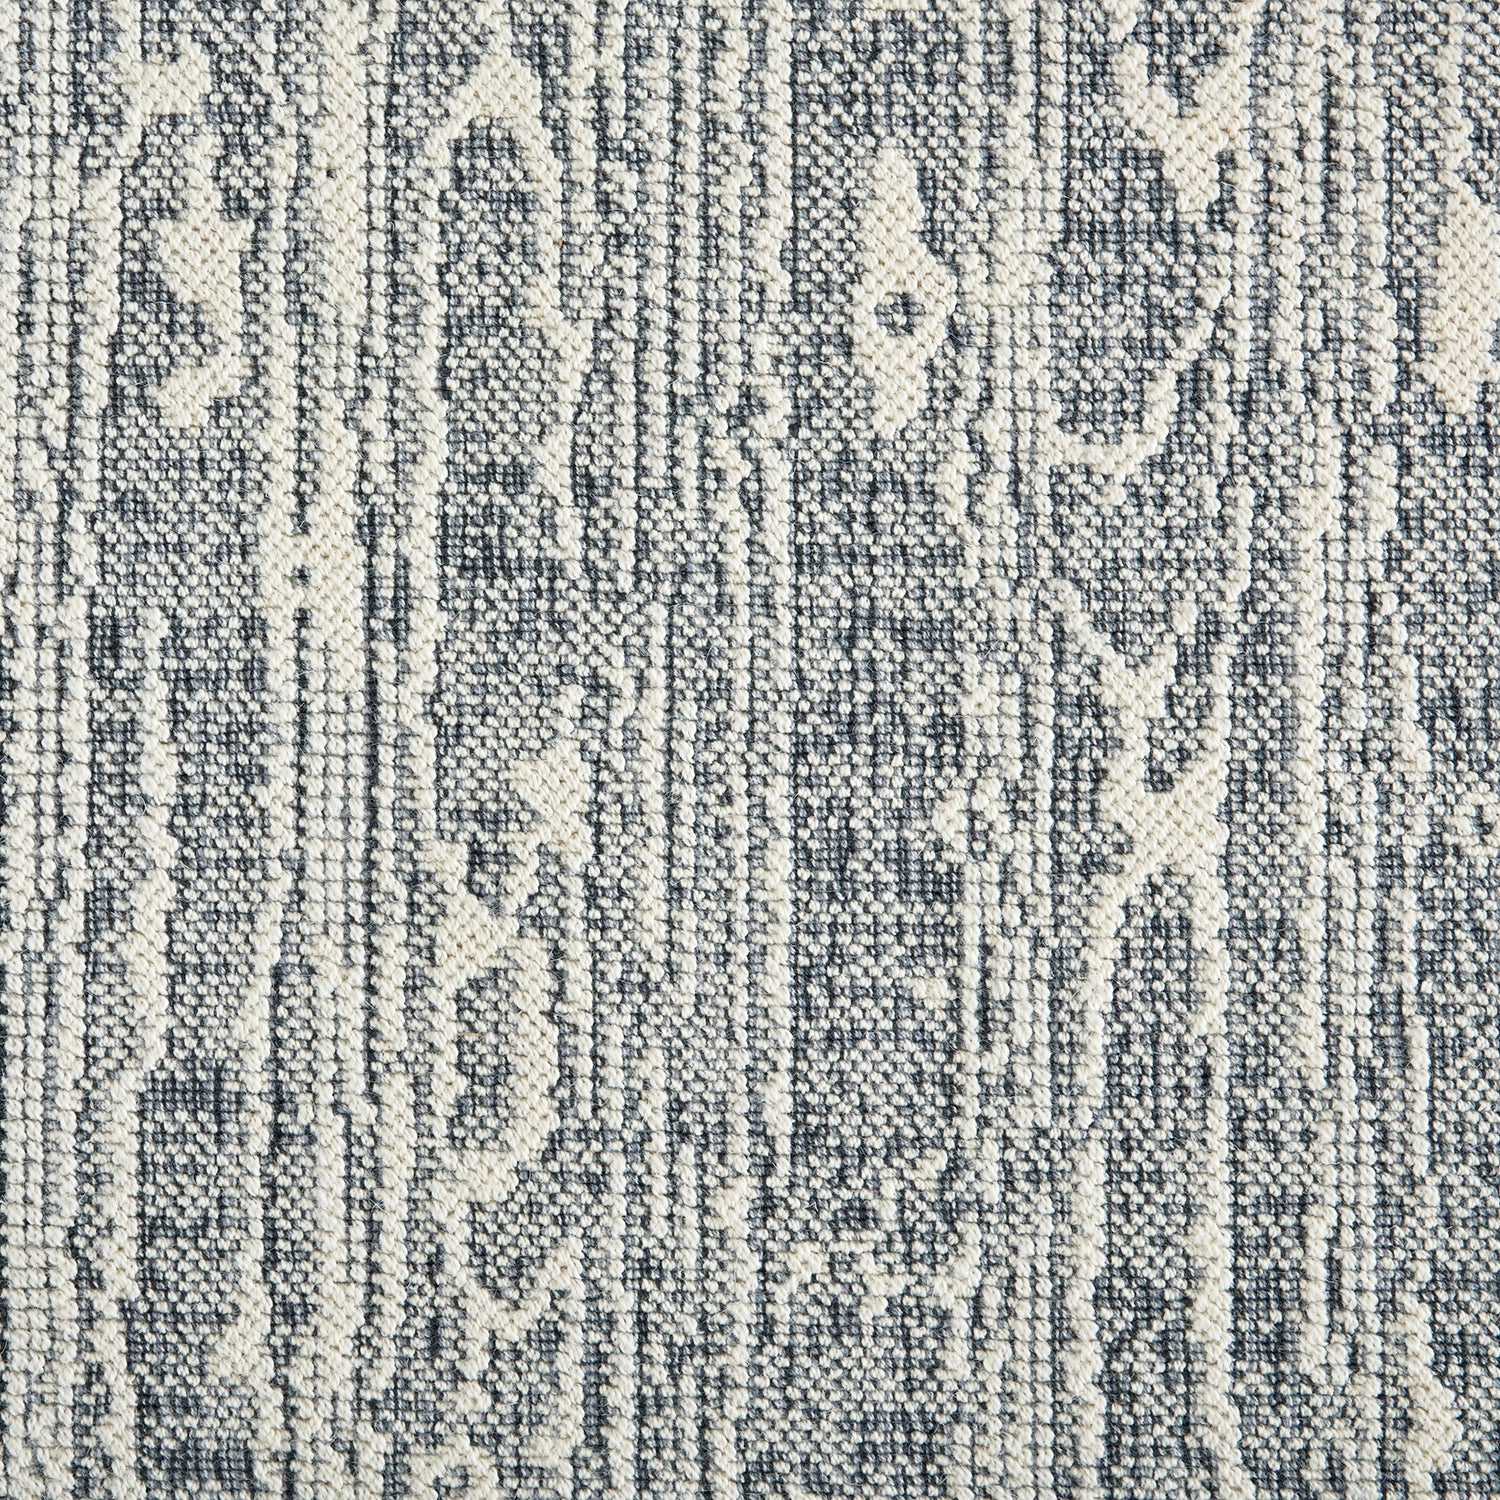 Wool-blend broadloom carpet swatch in a dimensional treetrunk weave pattern in cream and charcoal.